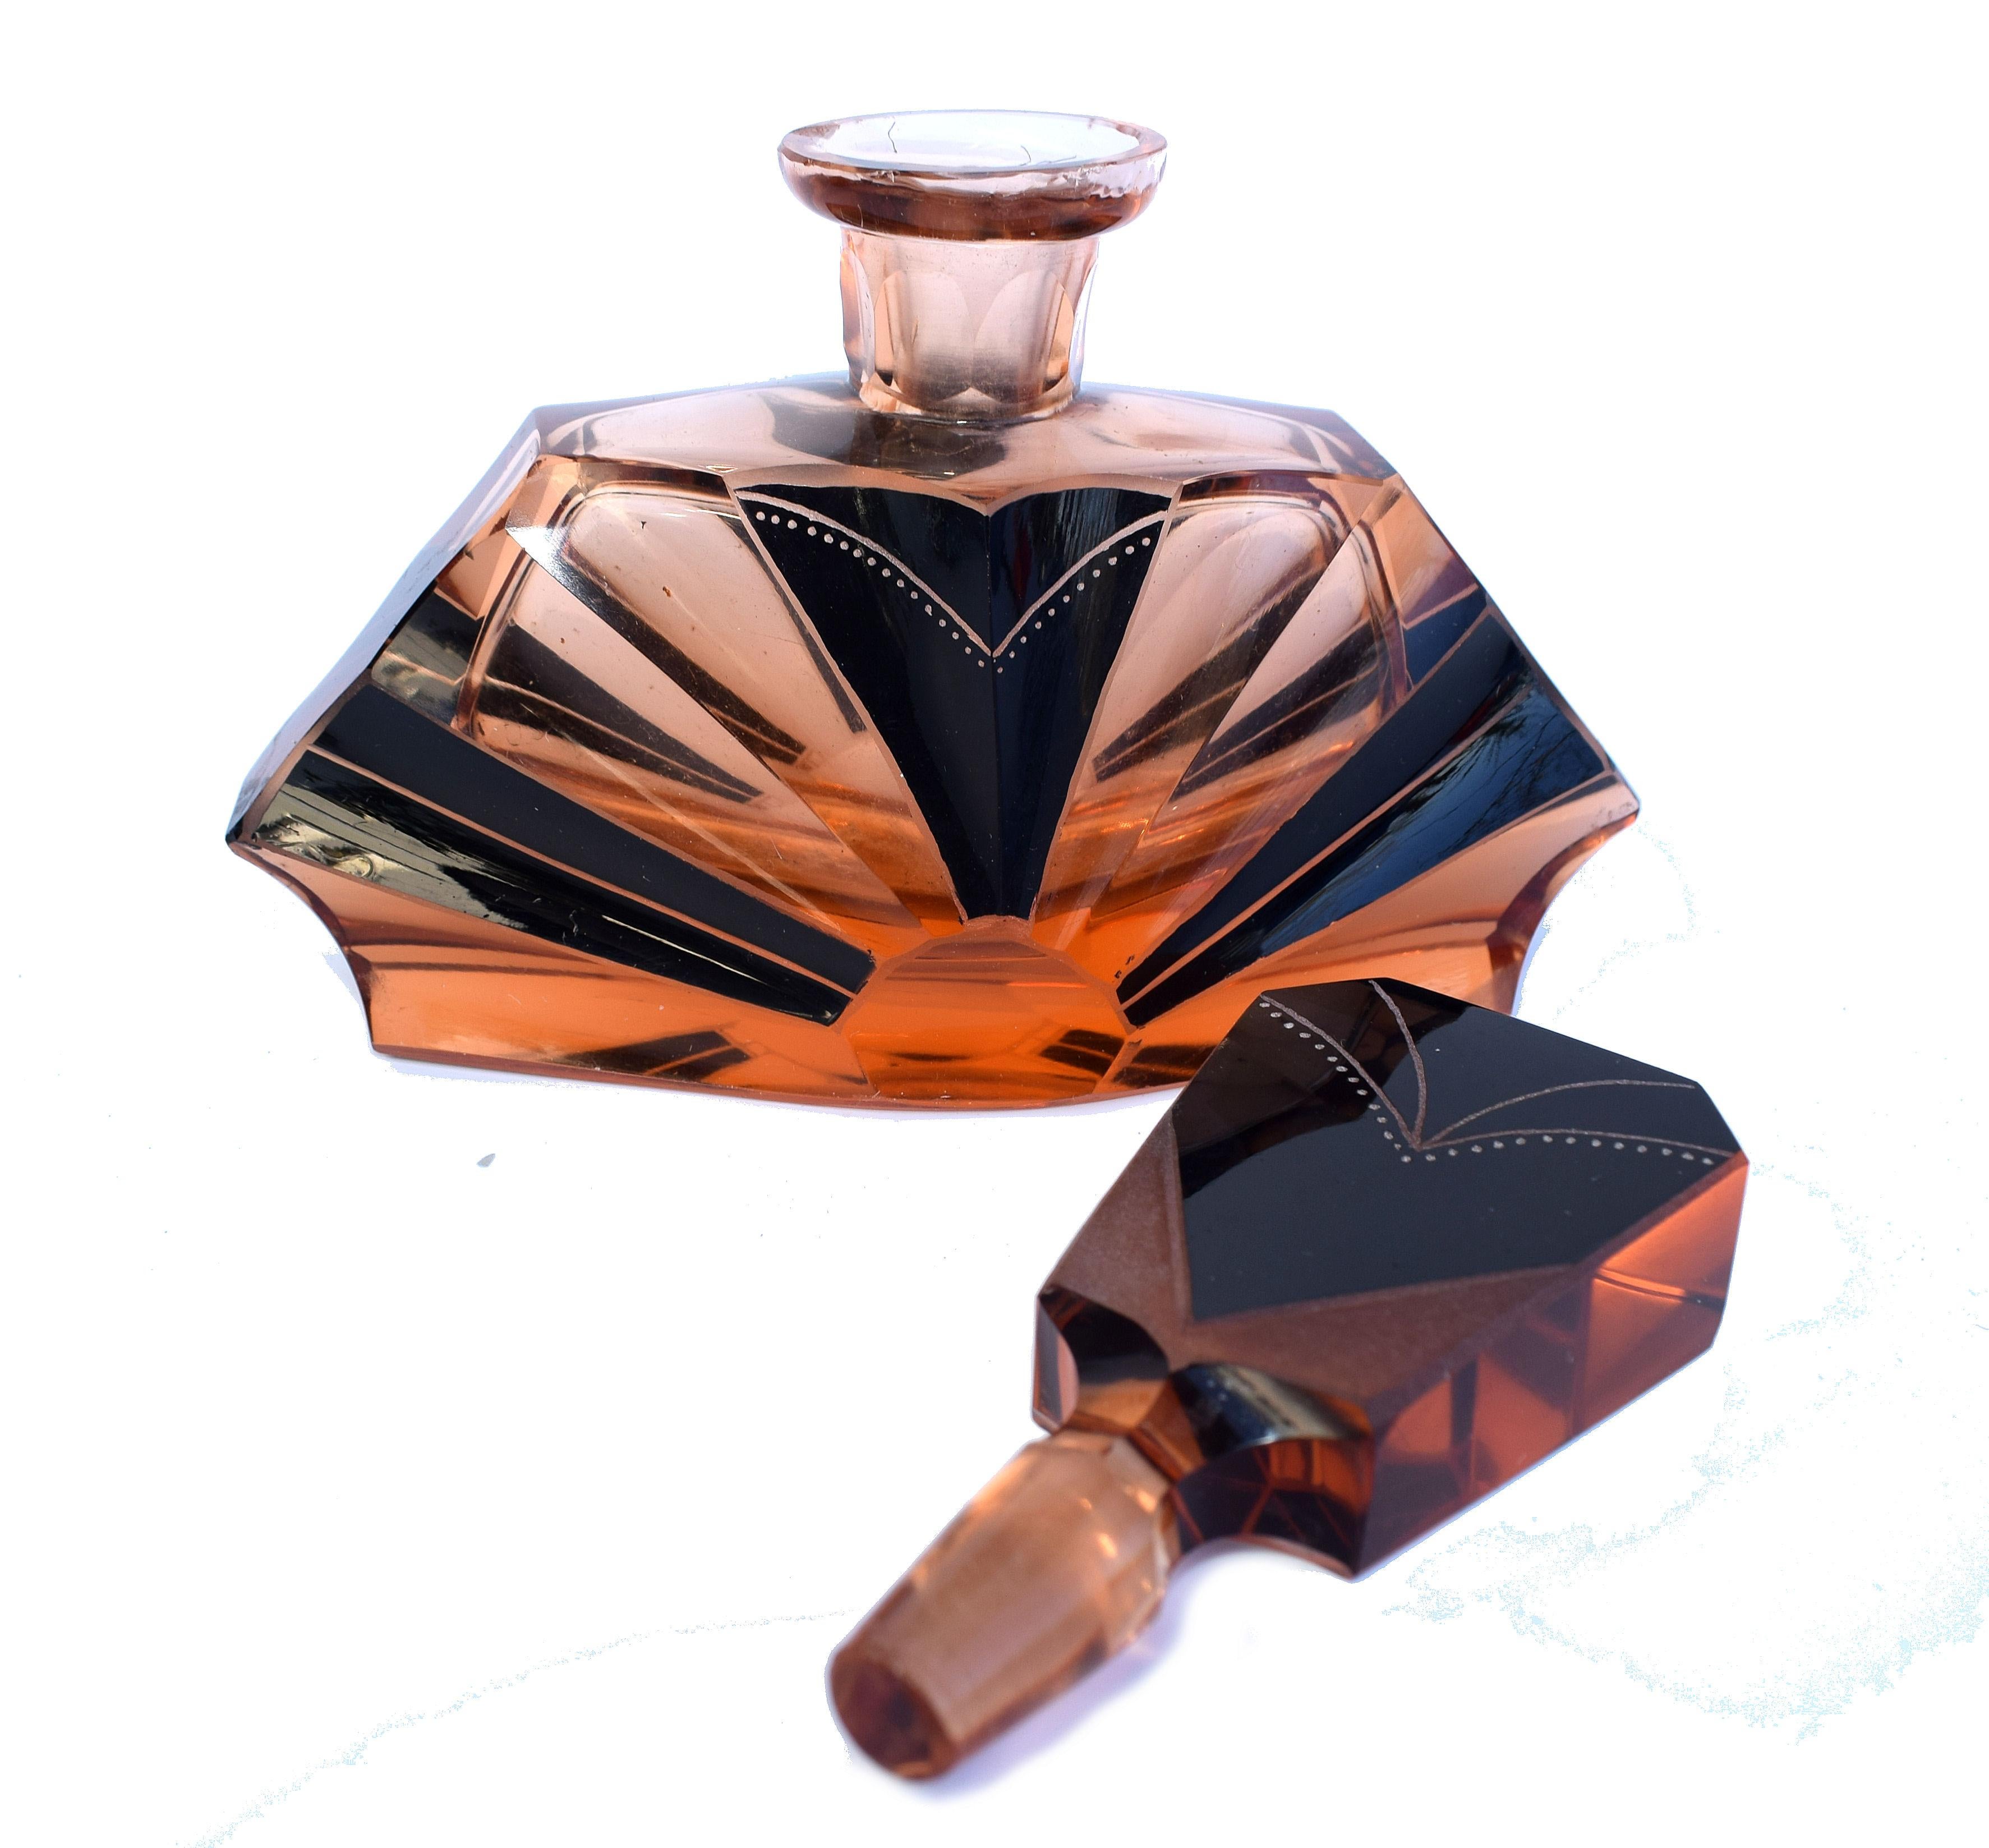 20th Century Art Deco Amber Colored 1930s Glass Perfume Scent Bottle